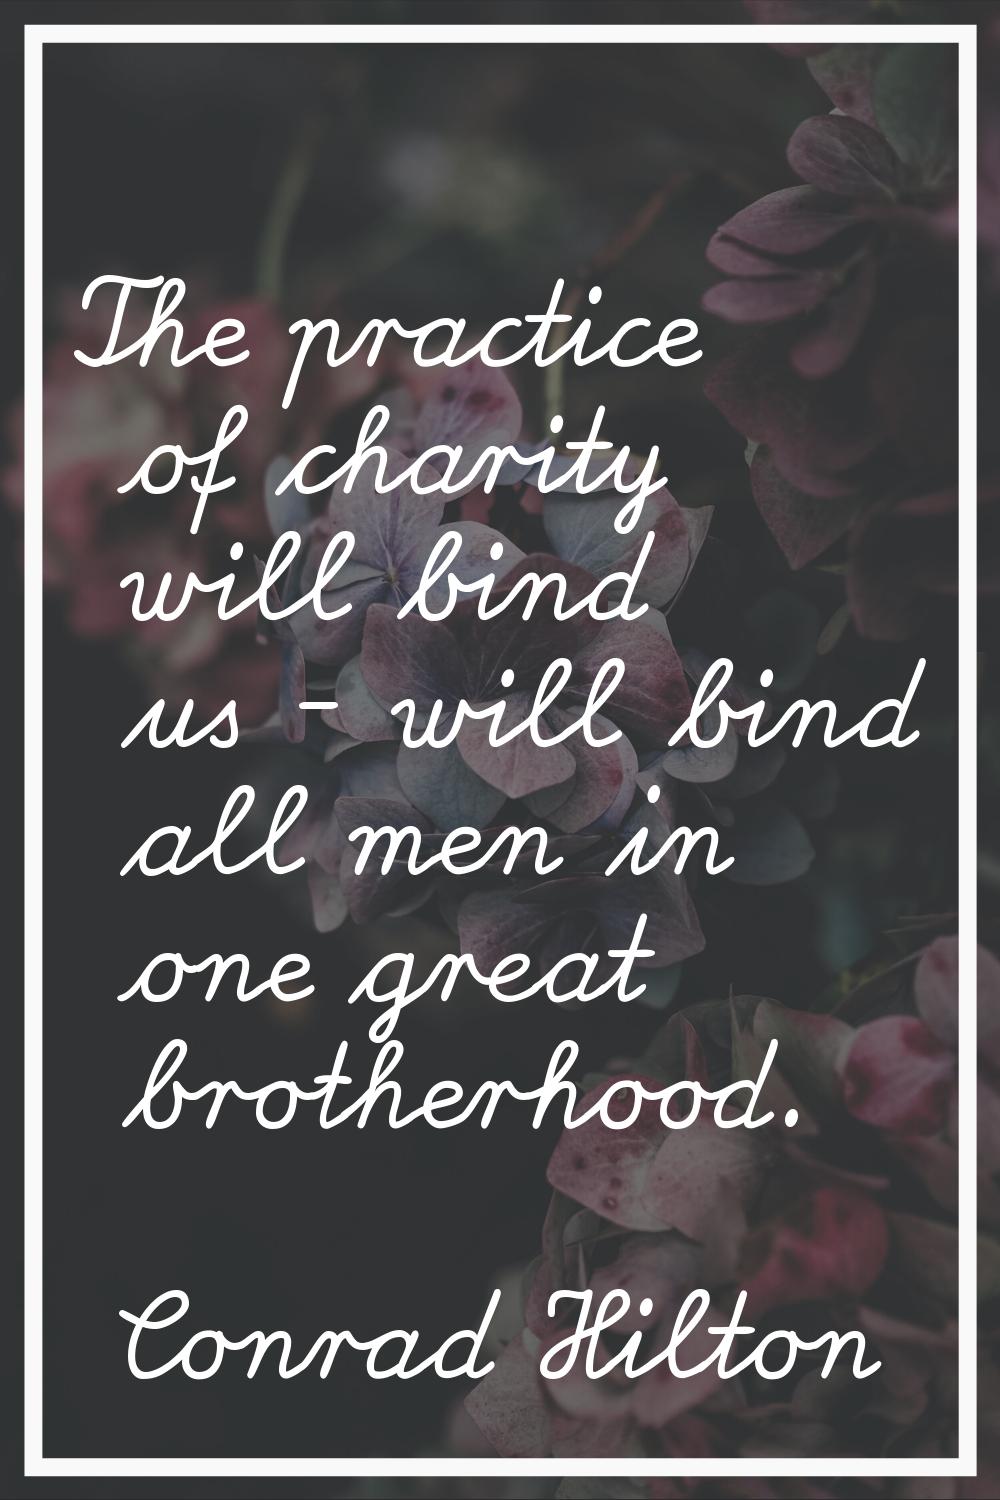 The practice of charity will bind us - will bind all men in one great brotherhood.